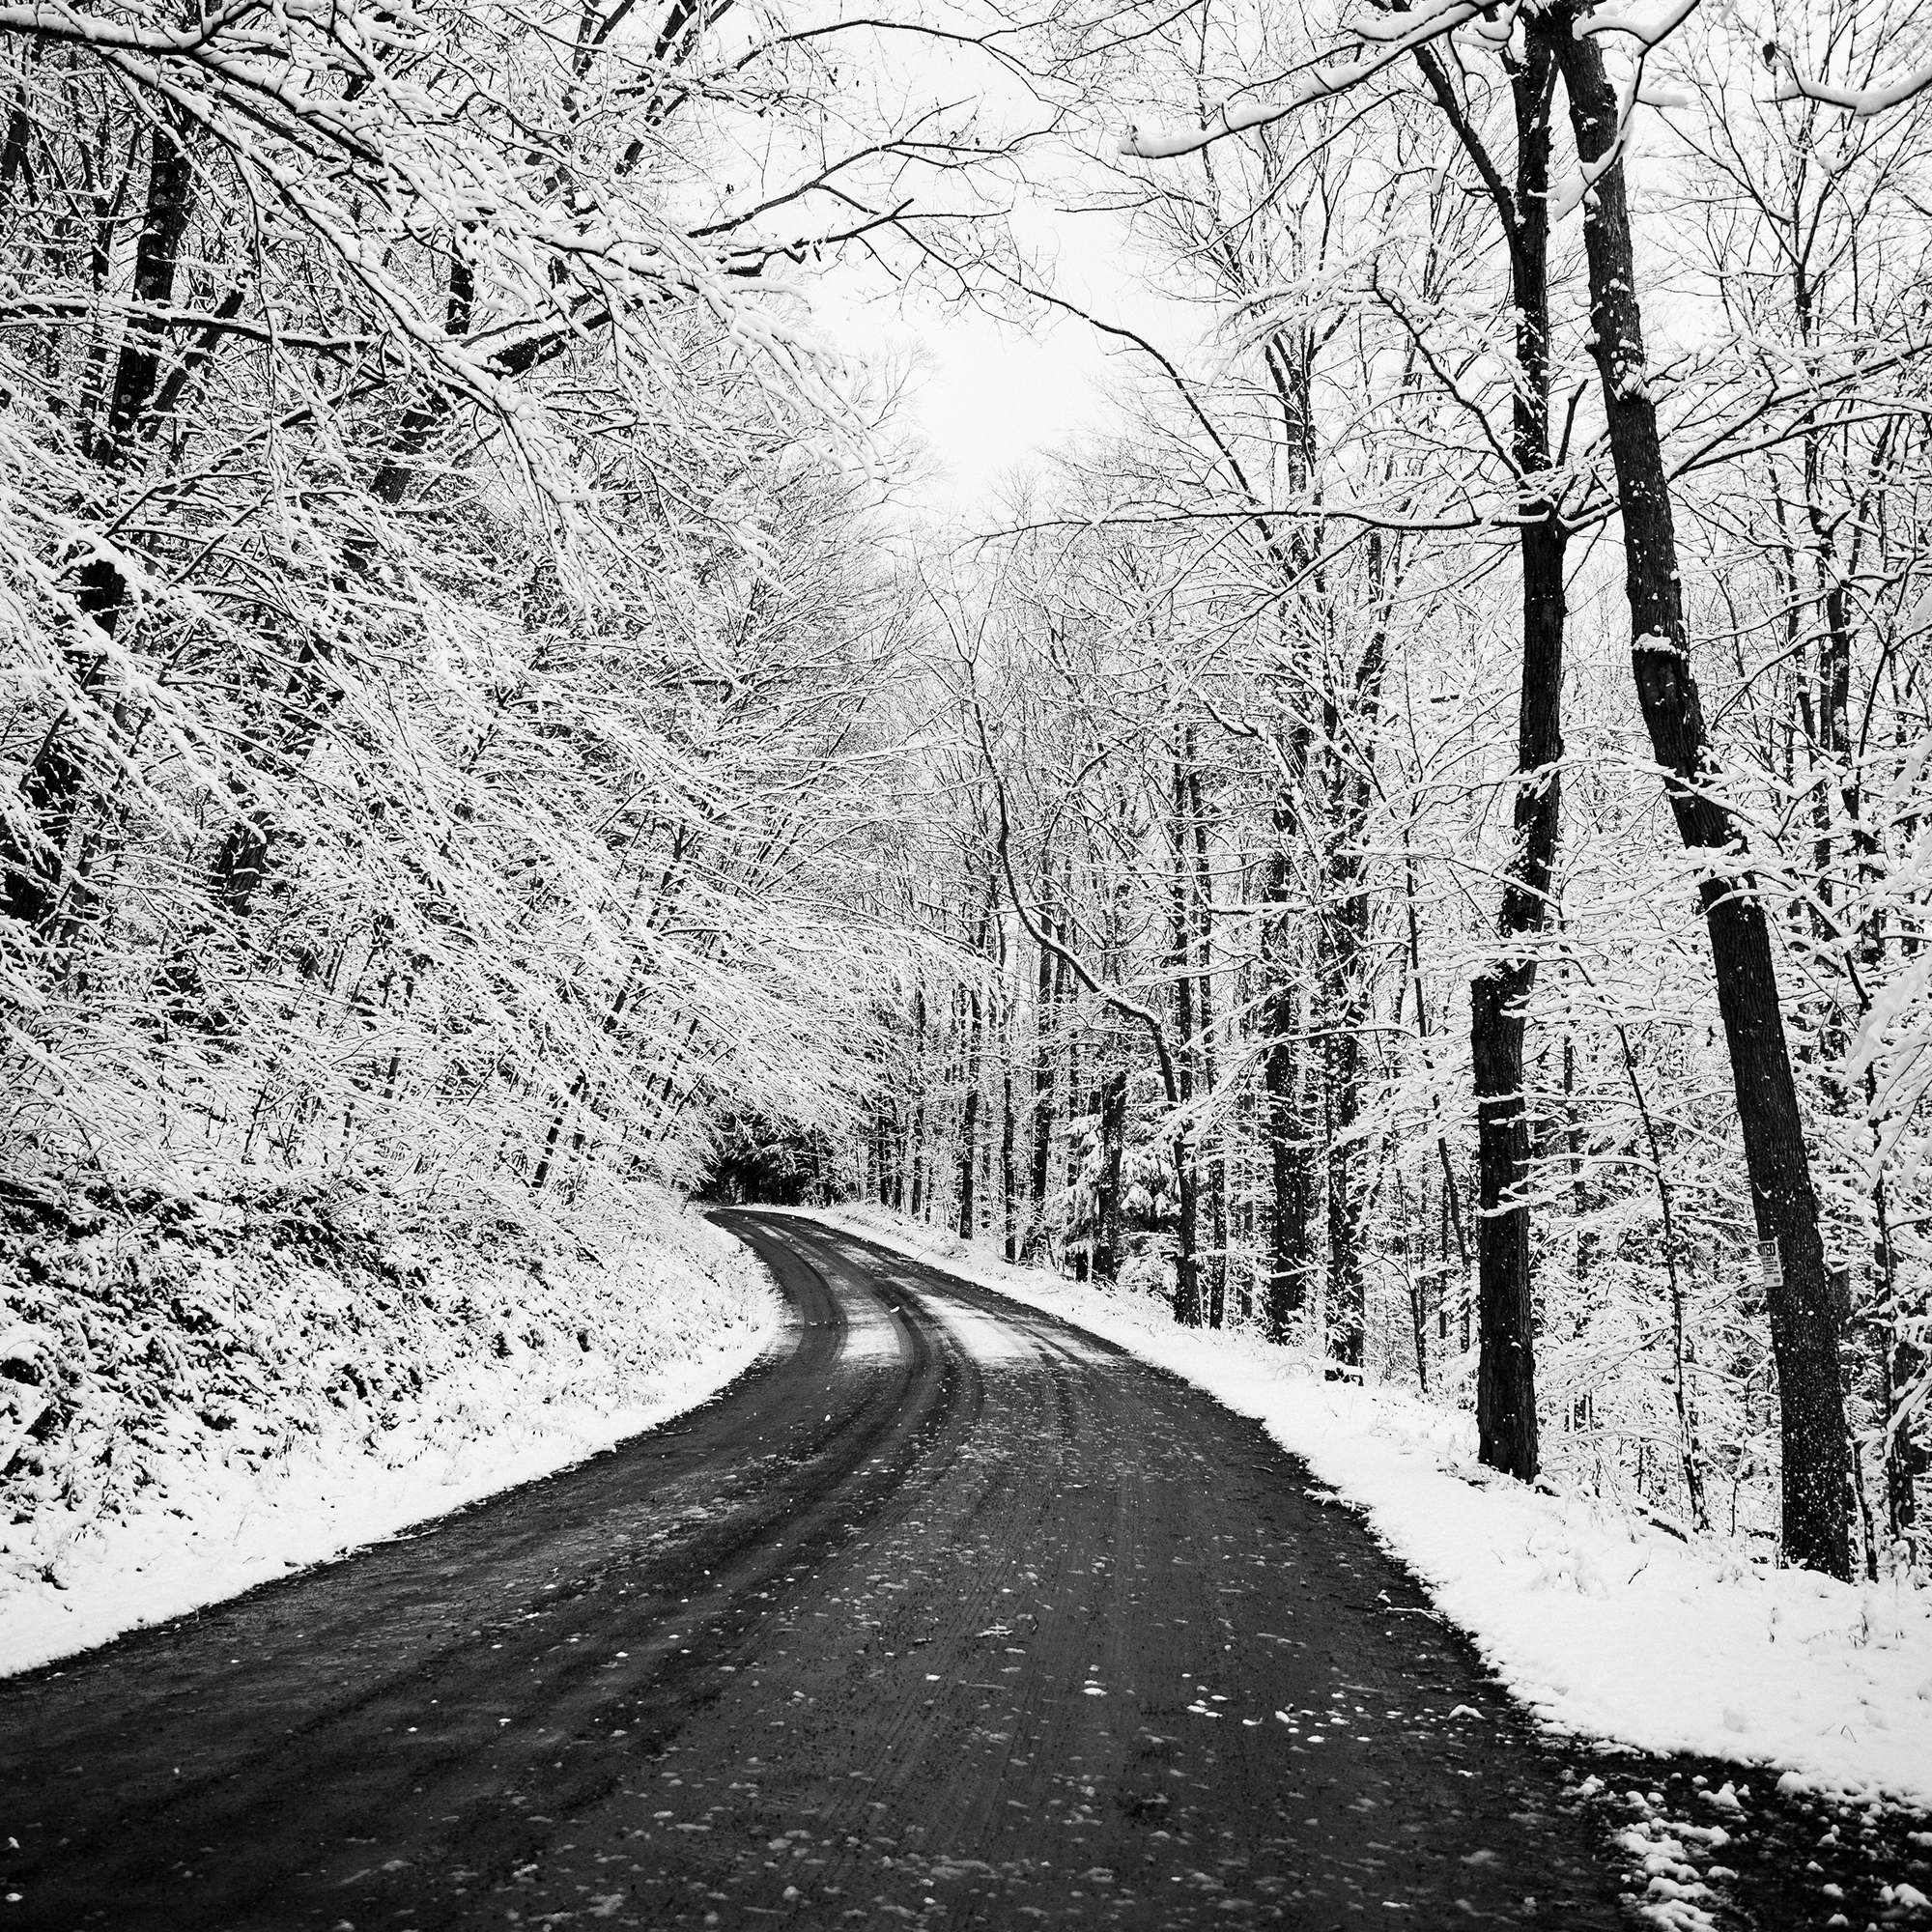 snowy forest and road